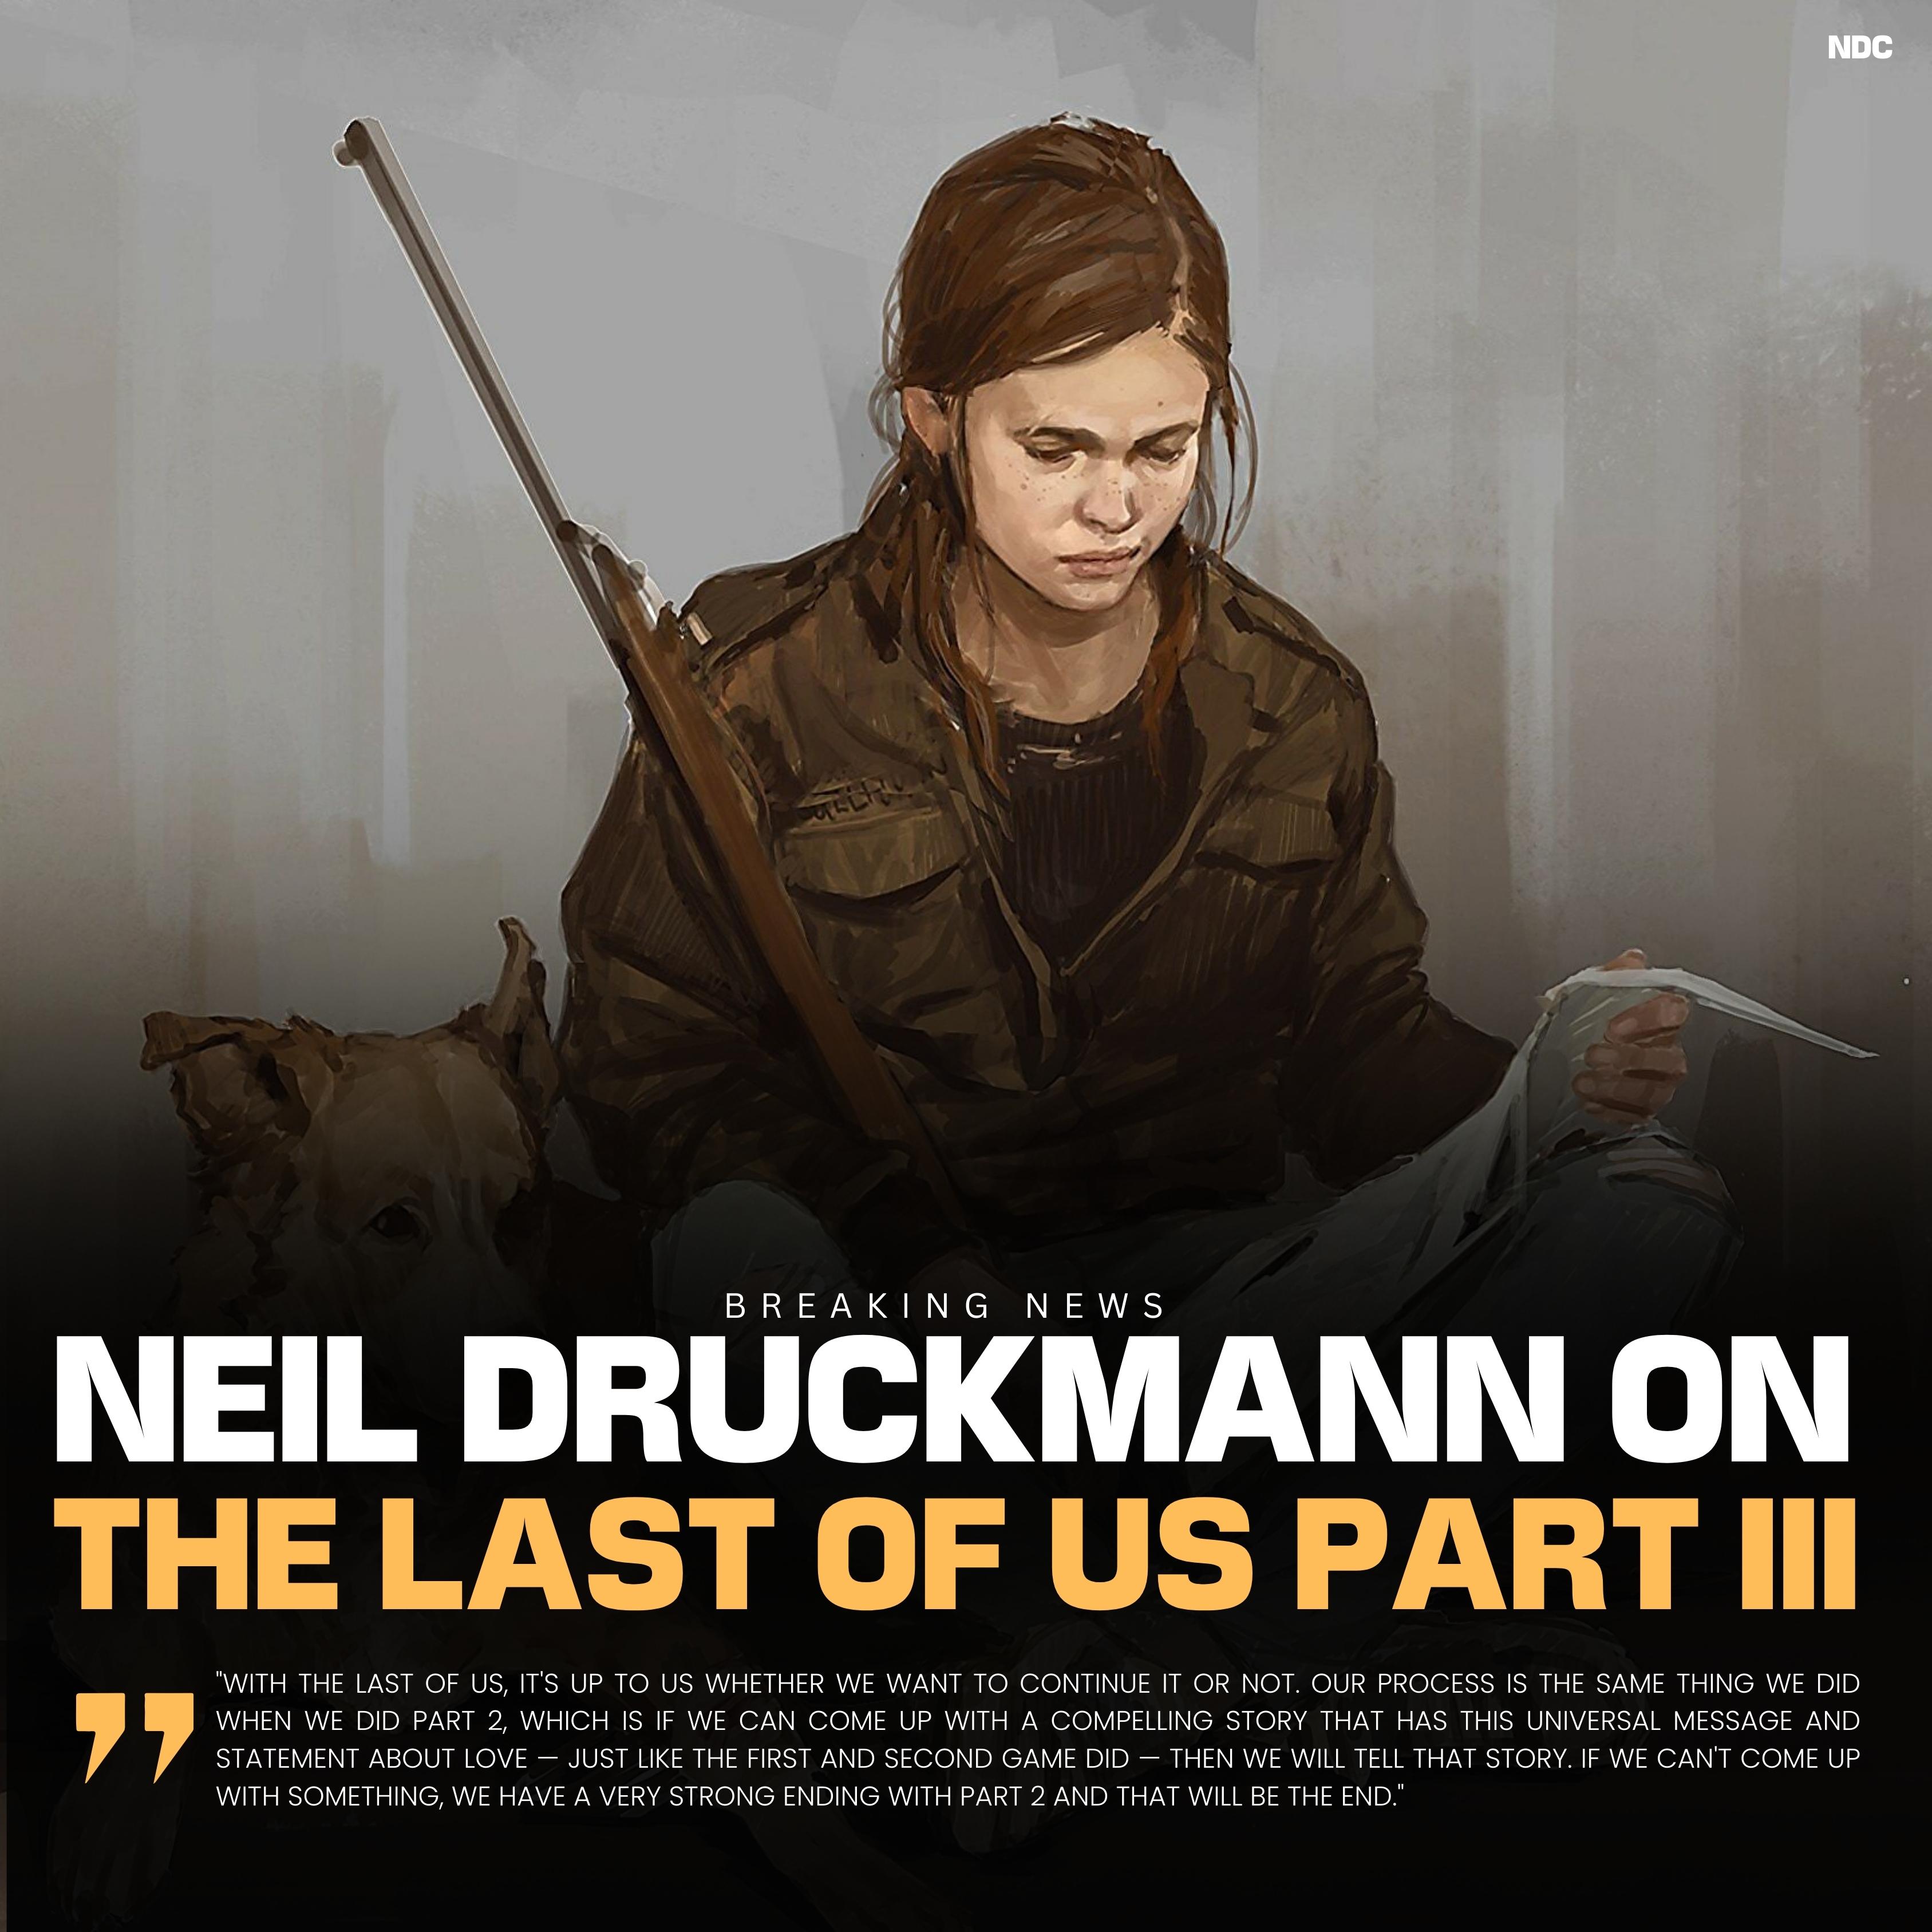 My Comms Director Will Slaughter Me” – Neil Druckmann May Have Potentially  Teased The Last of Us Part III, While Revealing Nothing - EssentiallySports